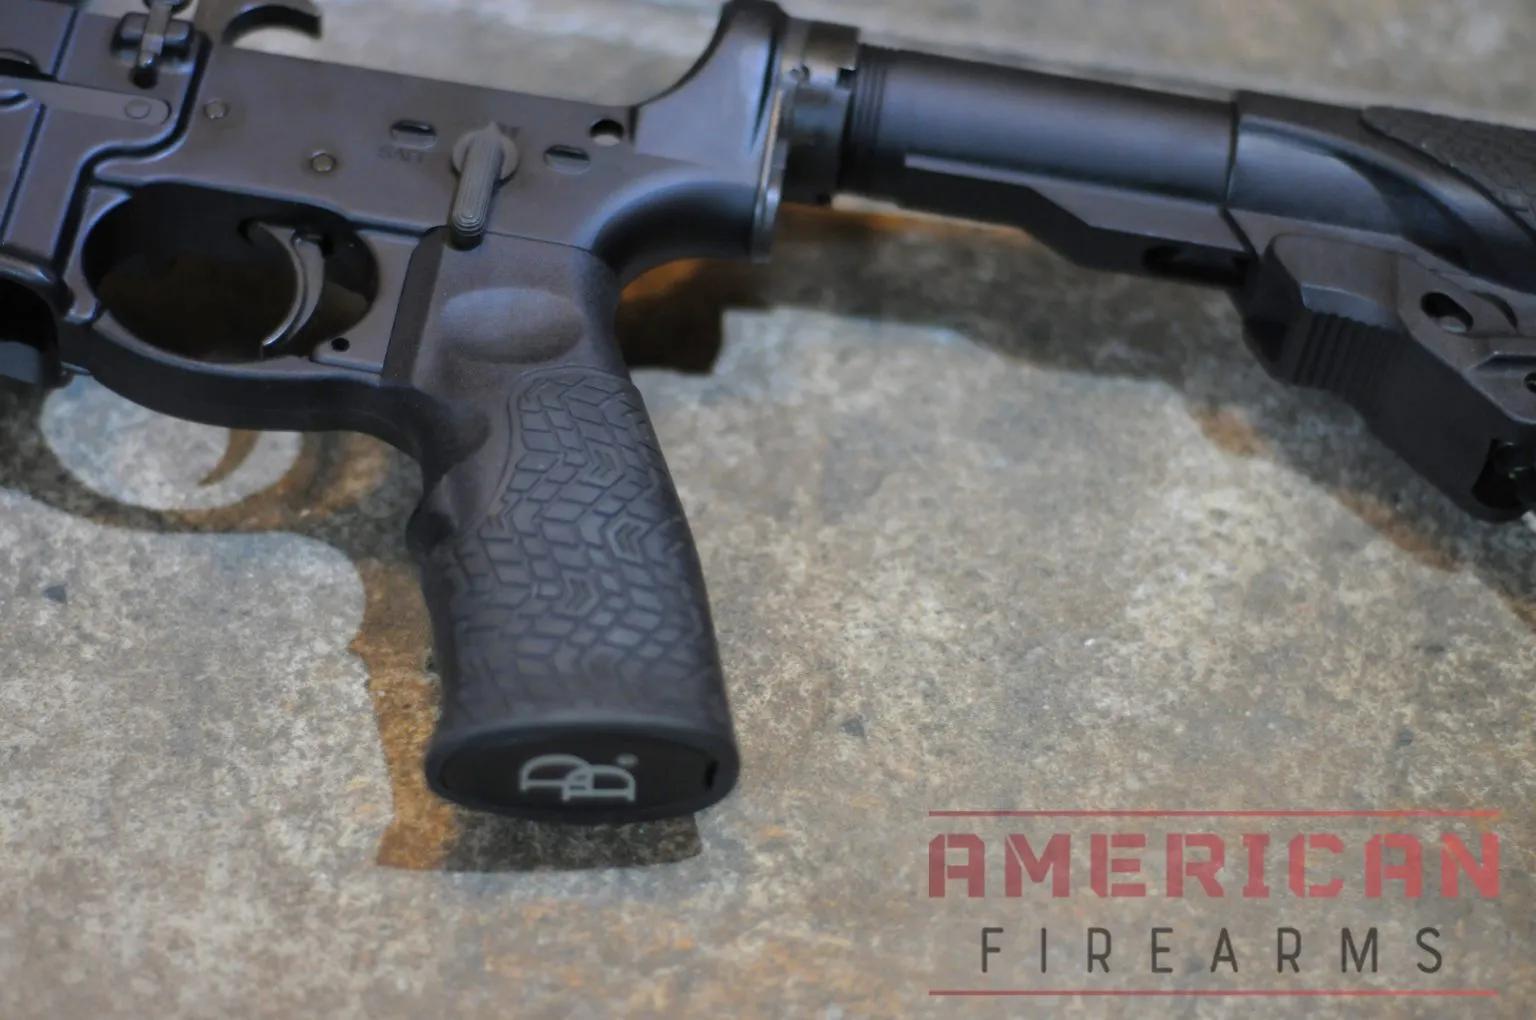 The Daniel Defense DDM4 grip is more robust than typical AR grips and always felt controllable and fun to shoot.